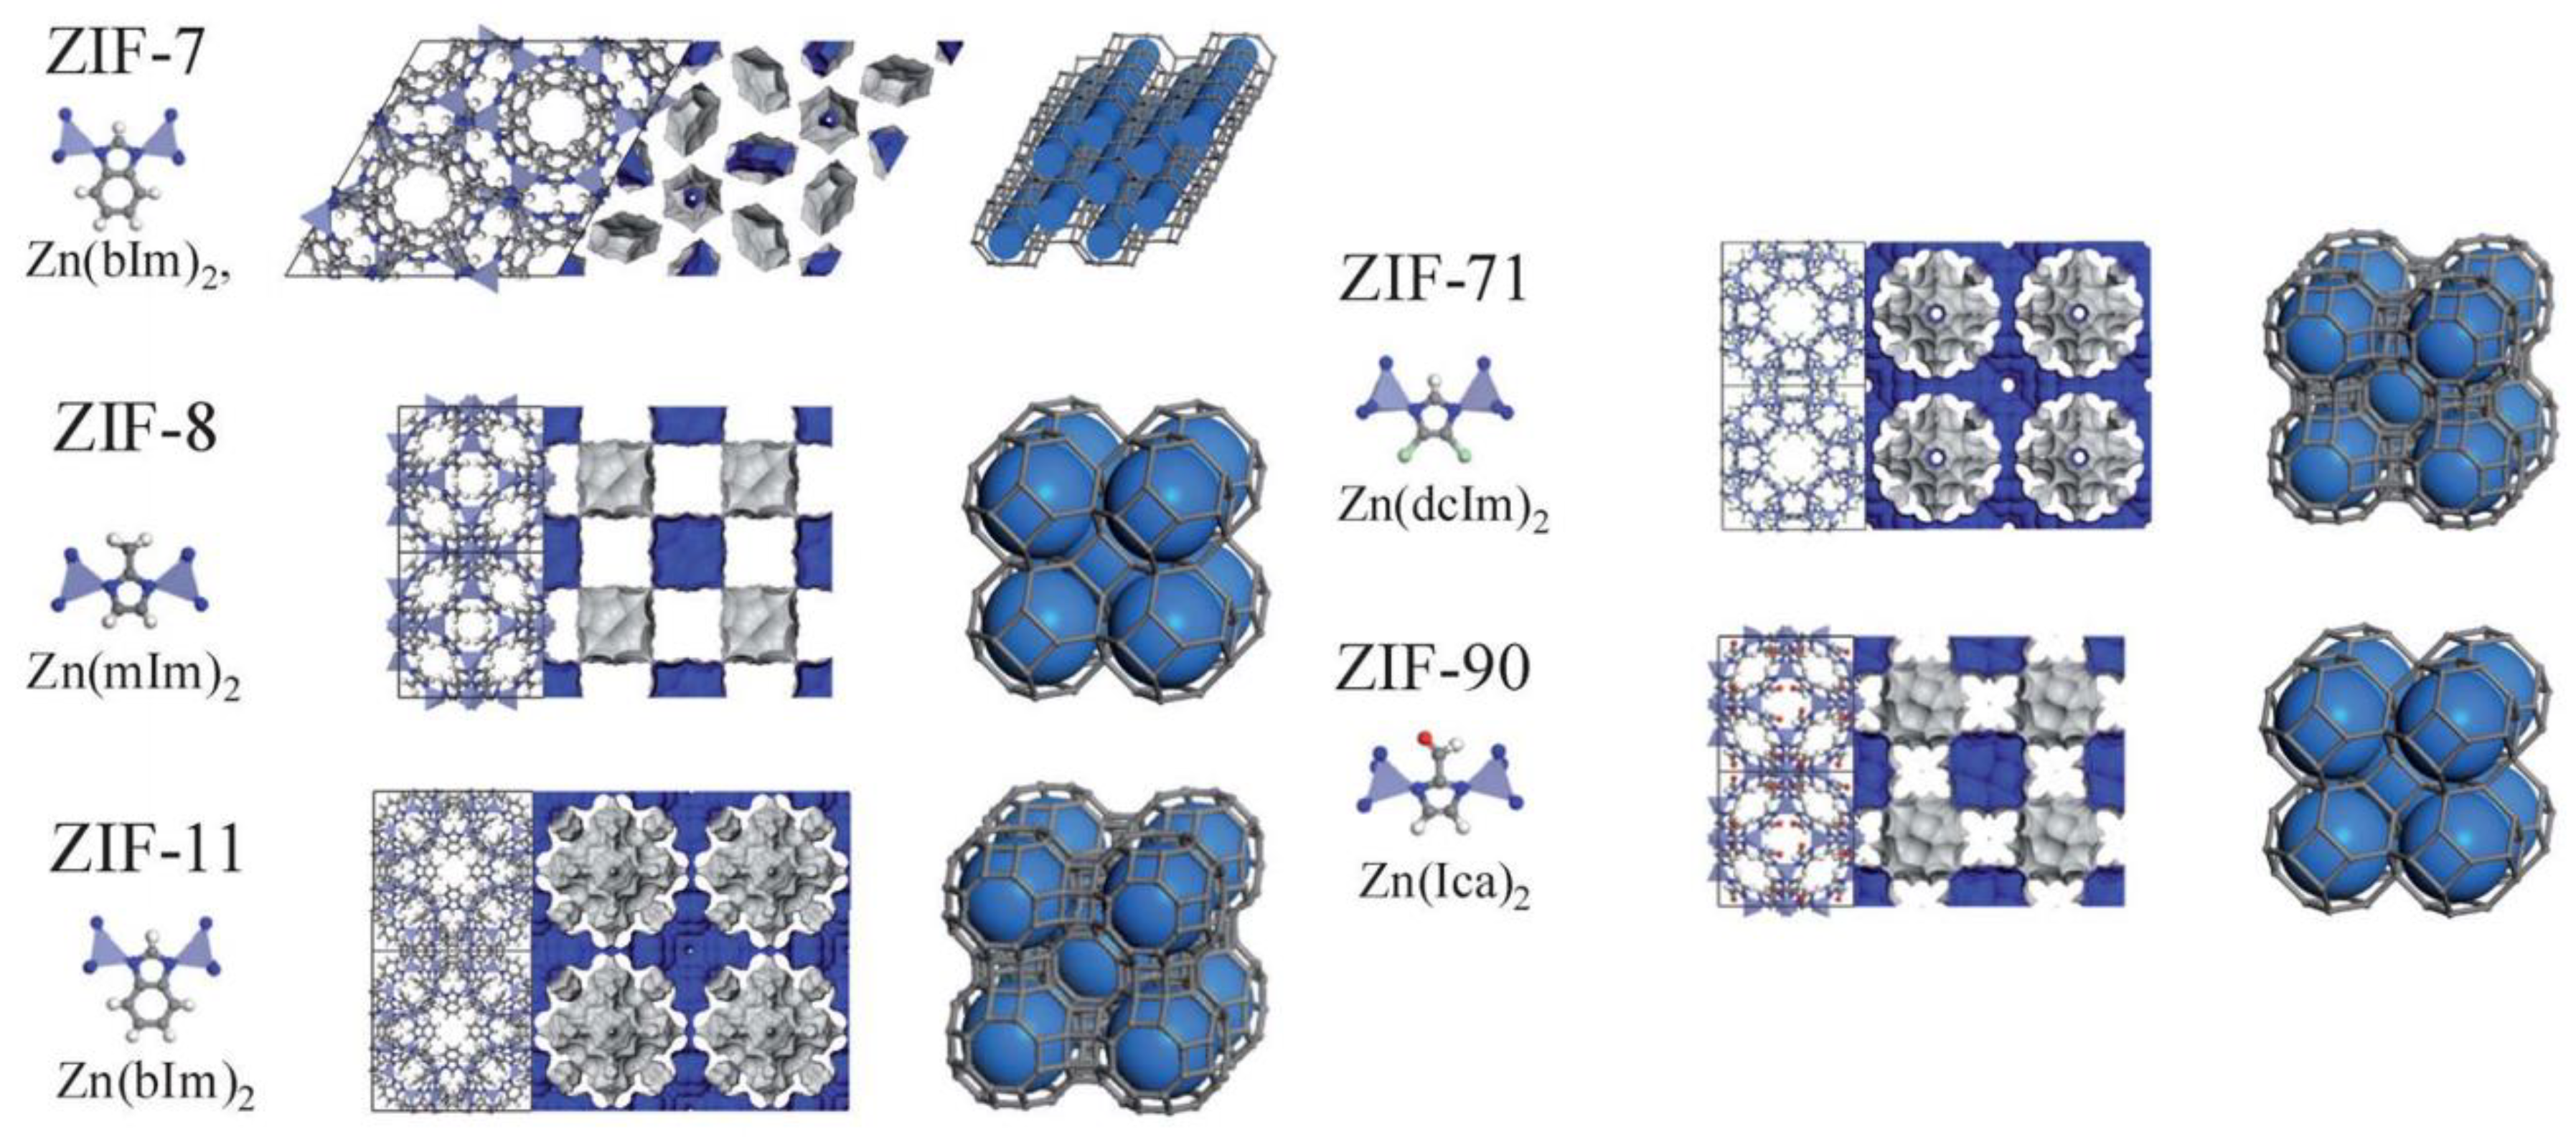 Membranes Free Full Text Performance Of Mixed Matrix Membranes Containing Porous Two Dimensional 2d And Three Dimensional 3d Fillers For Co2 Separation A Review Html